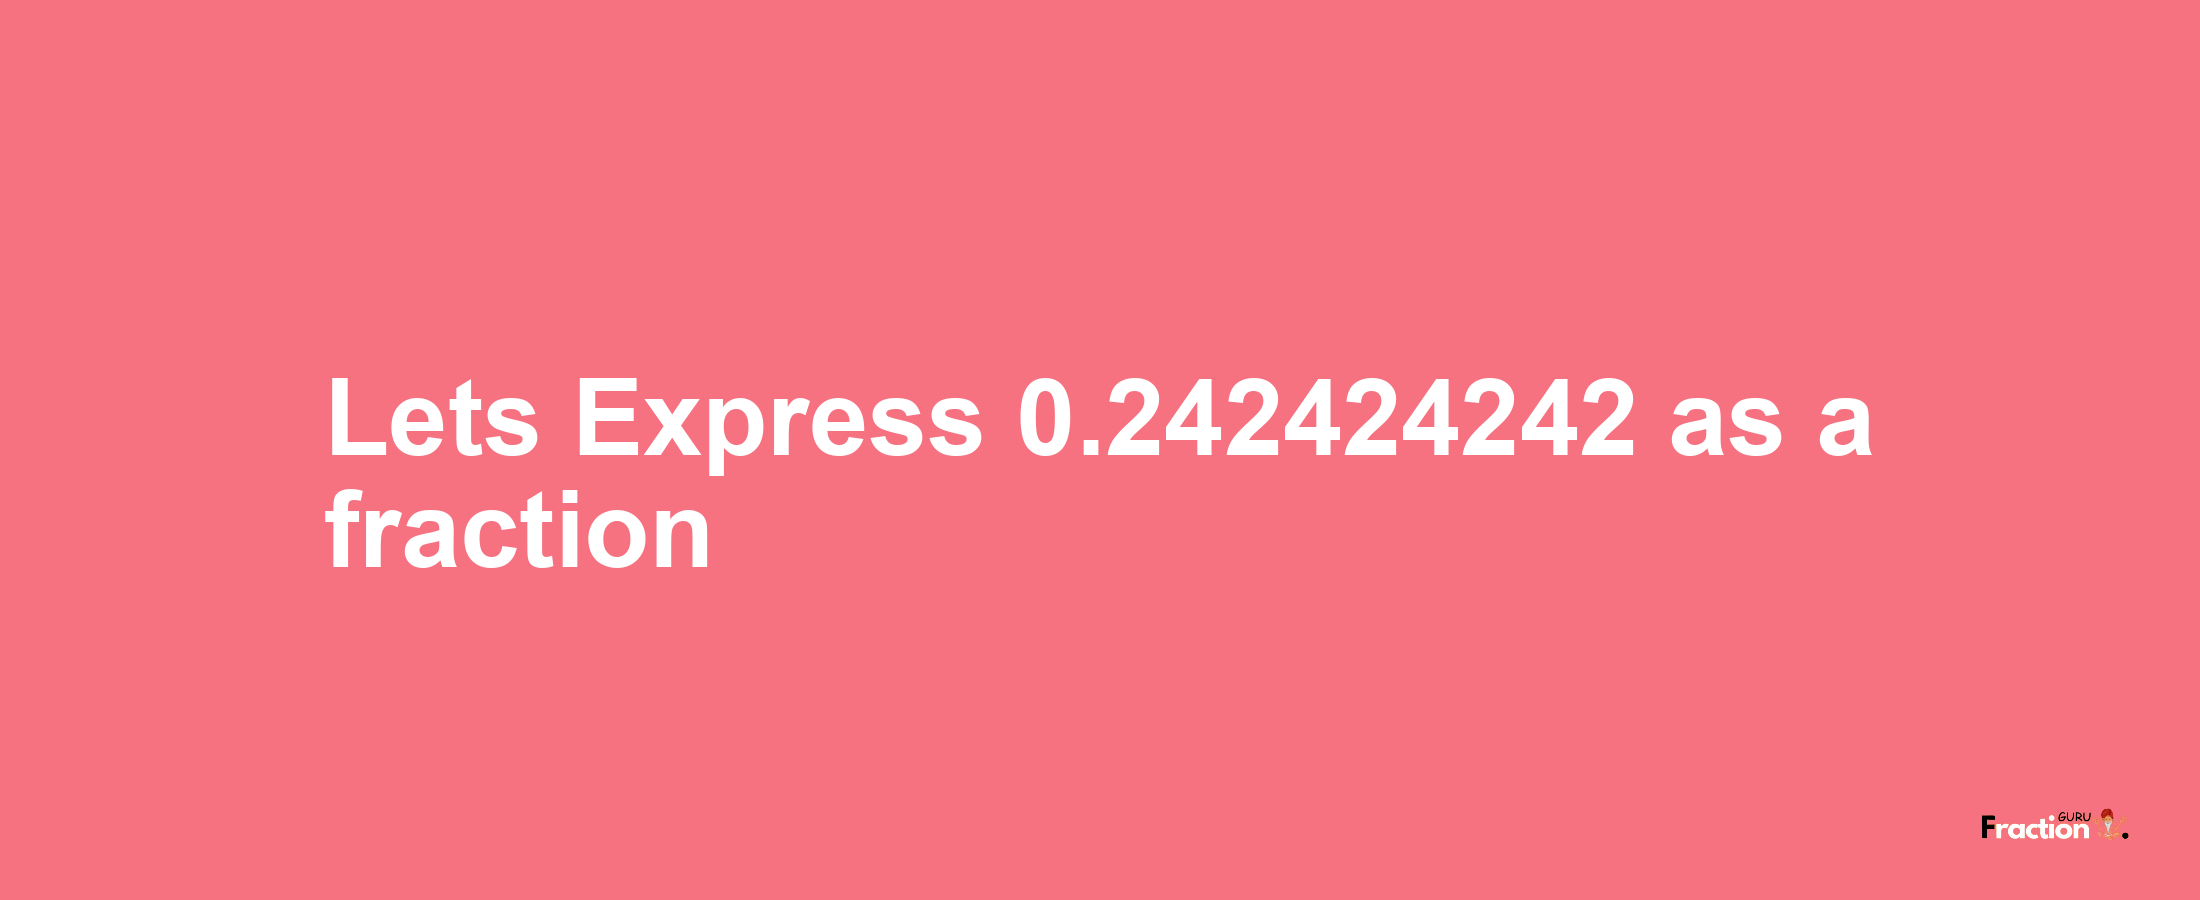 Lets Express 0.242424242 as afraction